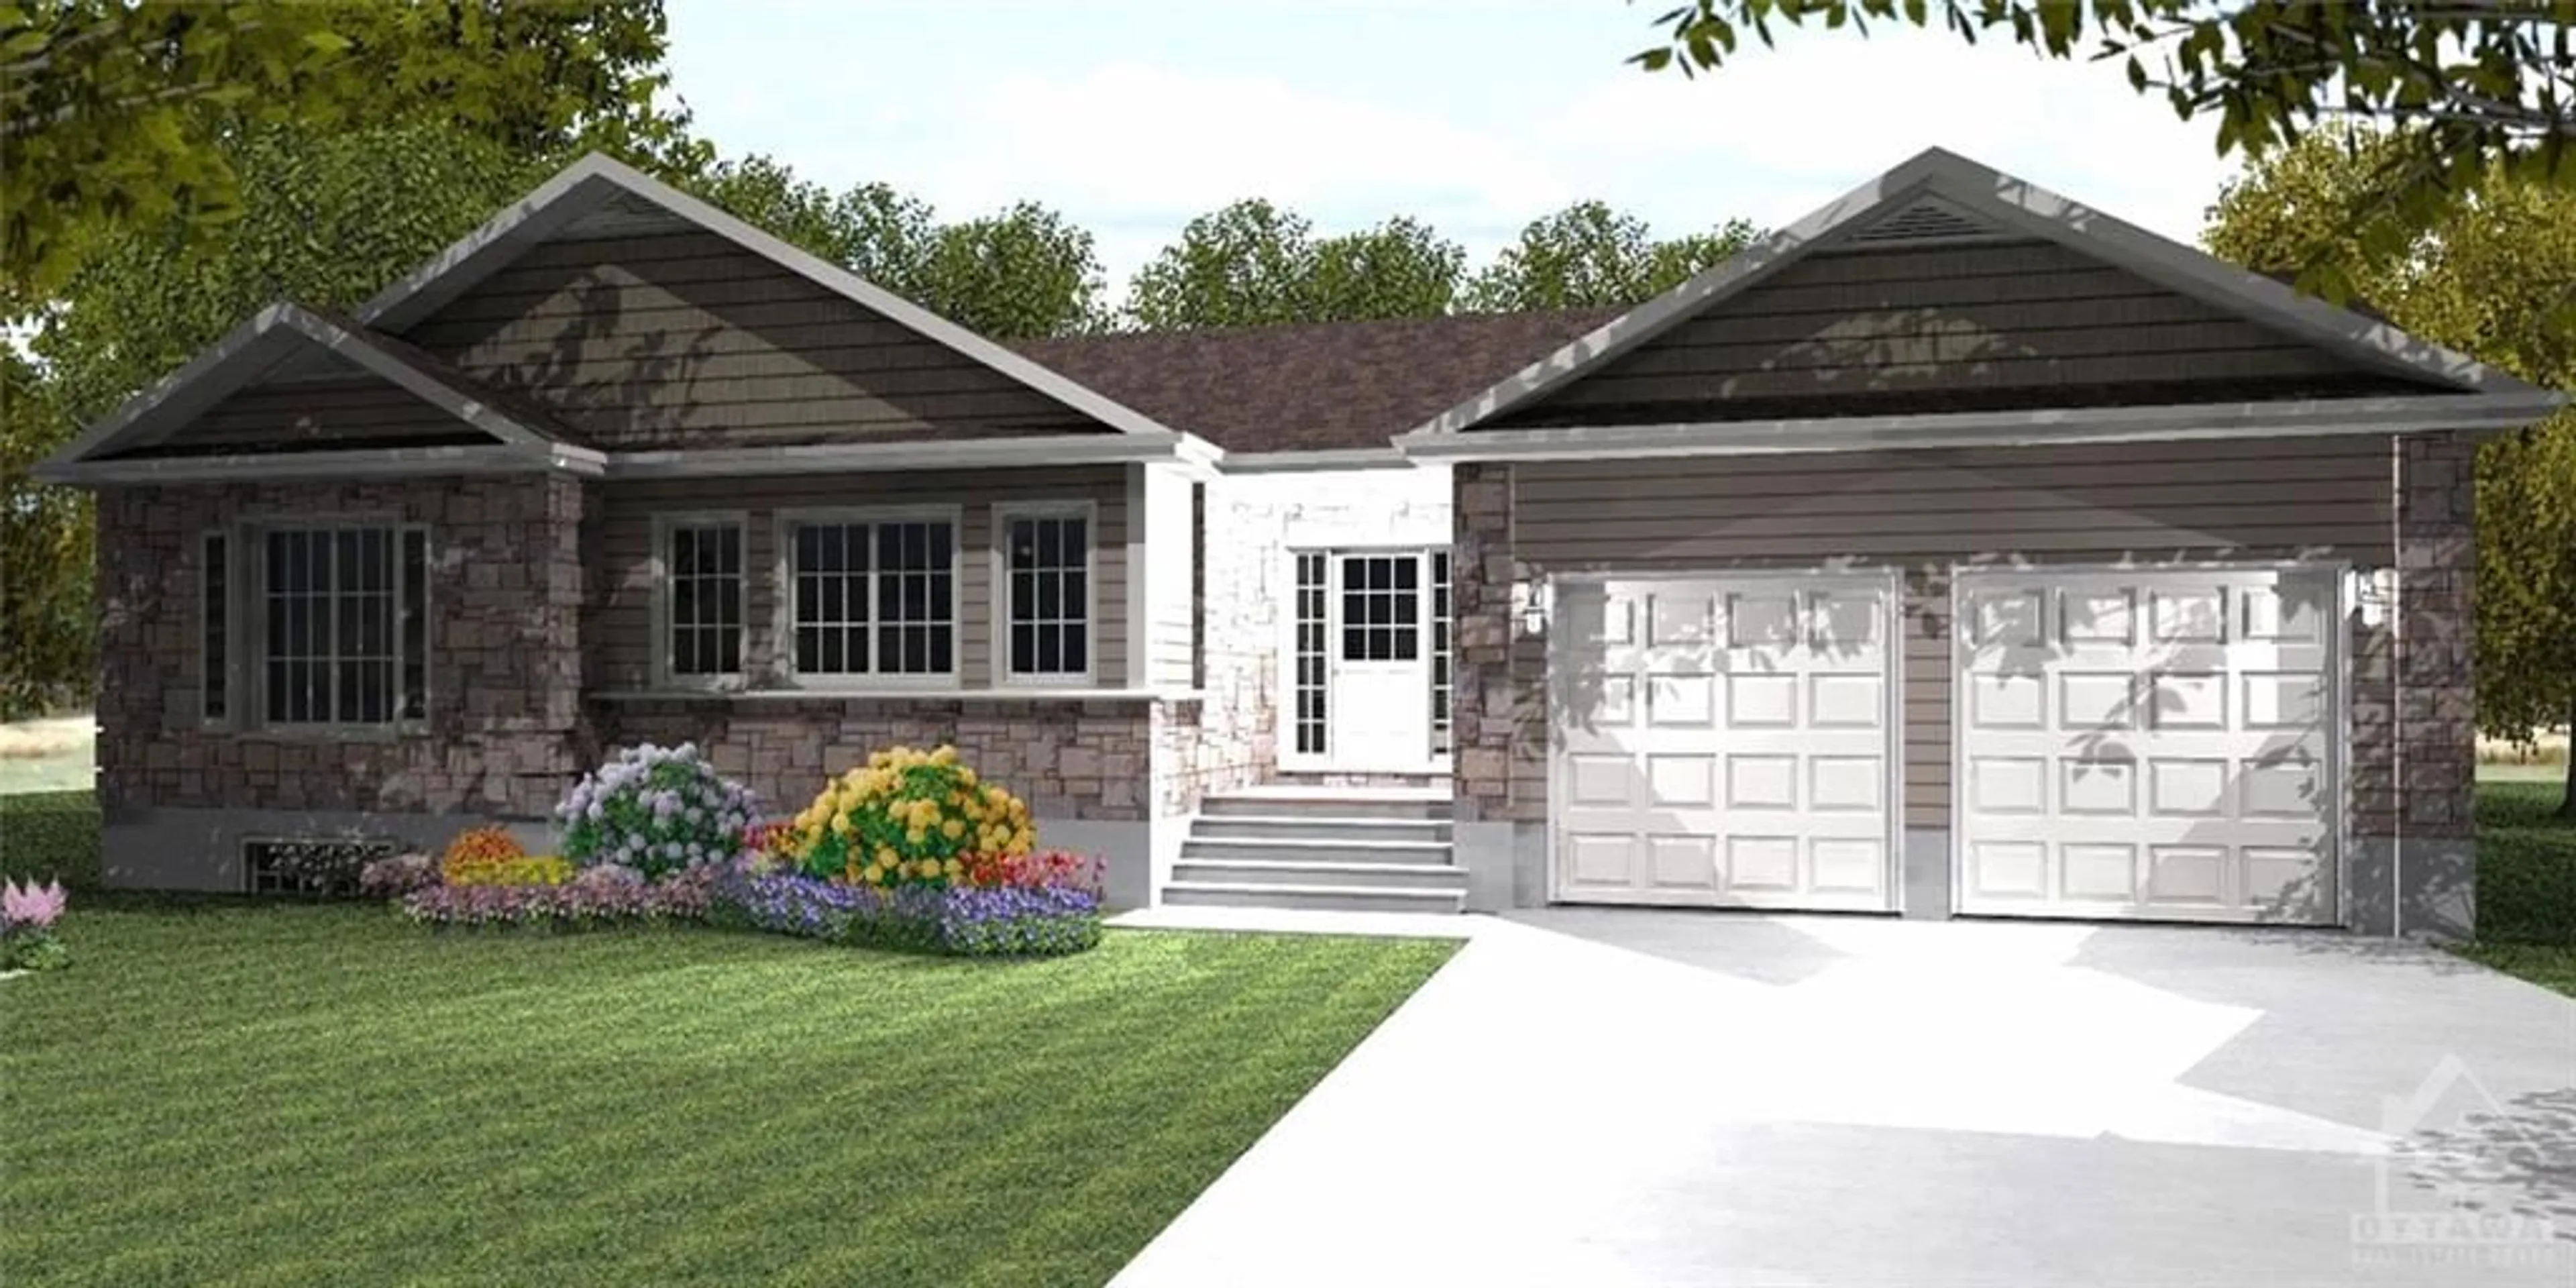 Home with vinyl exterior material for Lot 18-B NOLANS Rd, Montague Ontario K7C 4P2